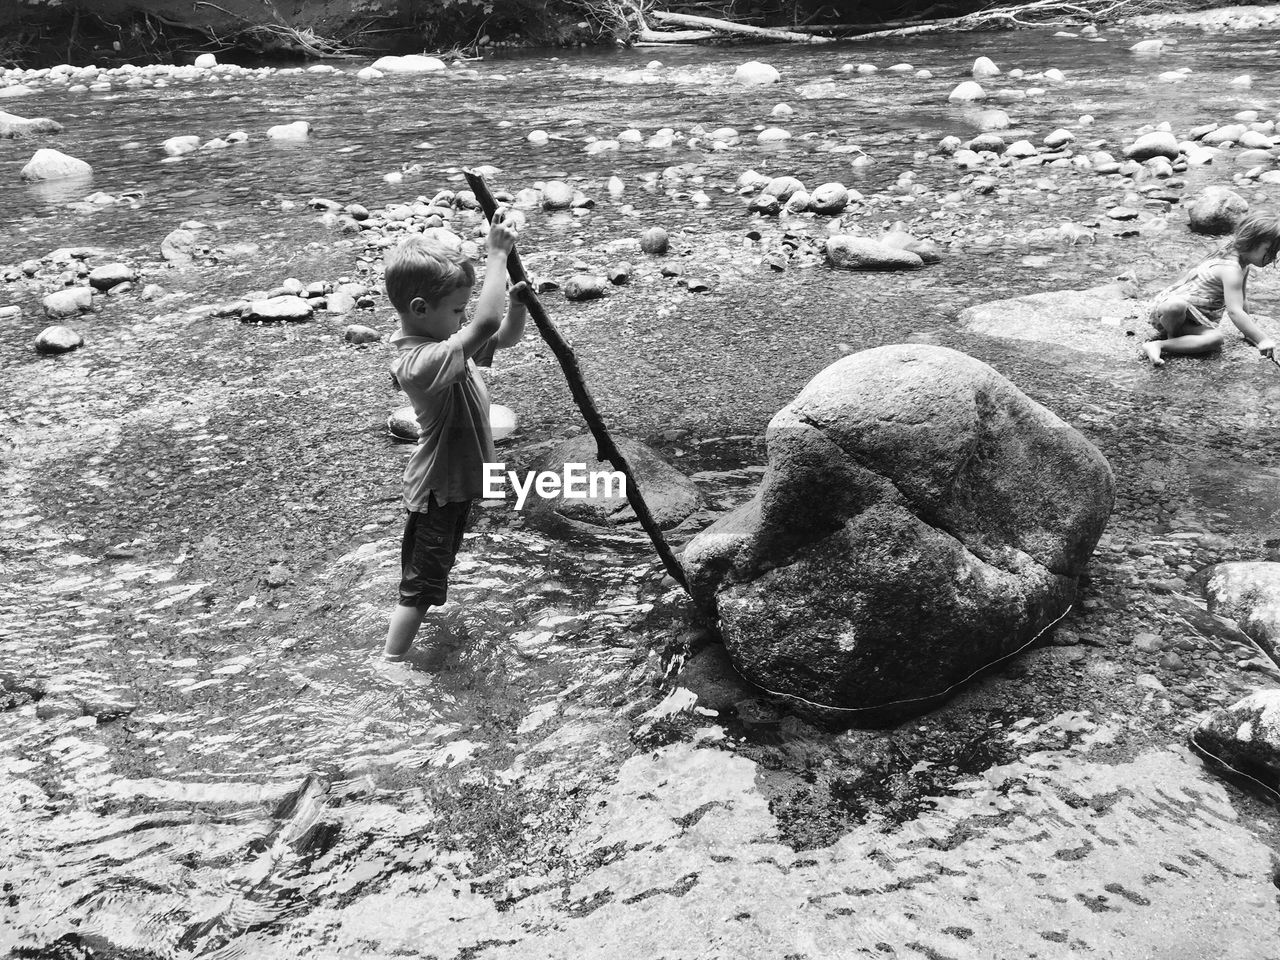 Boy holding stick while standing in river